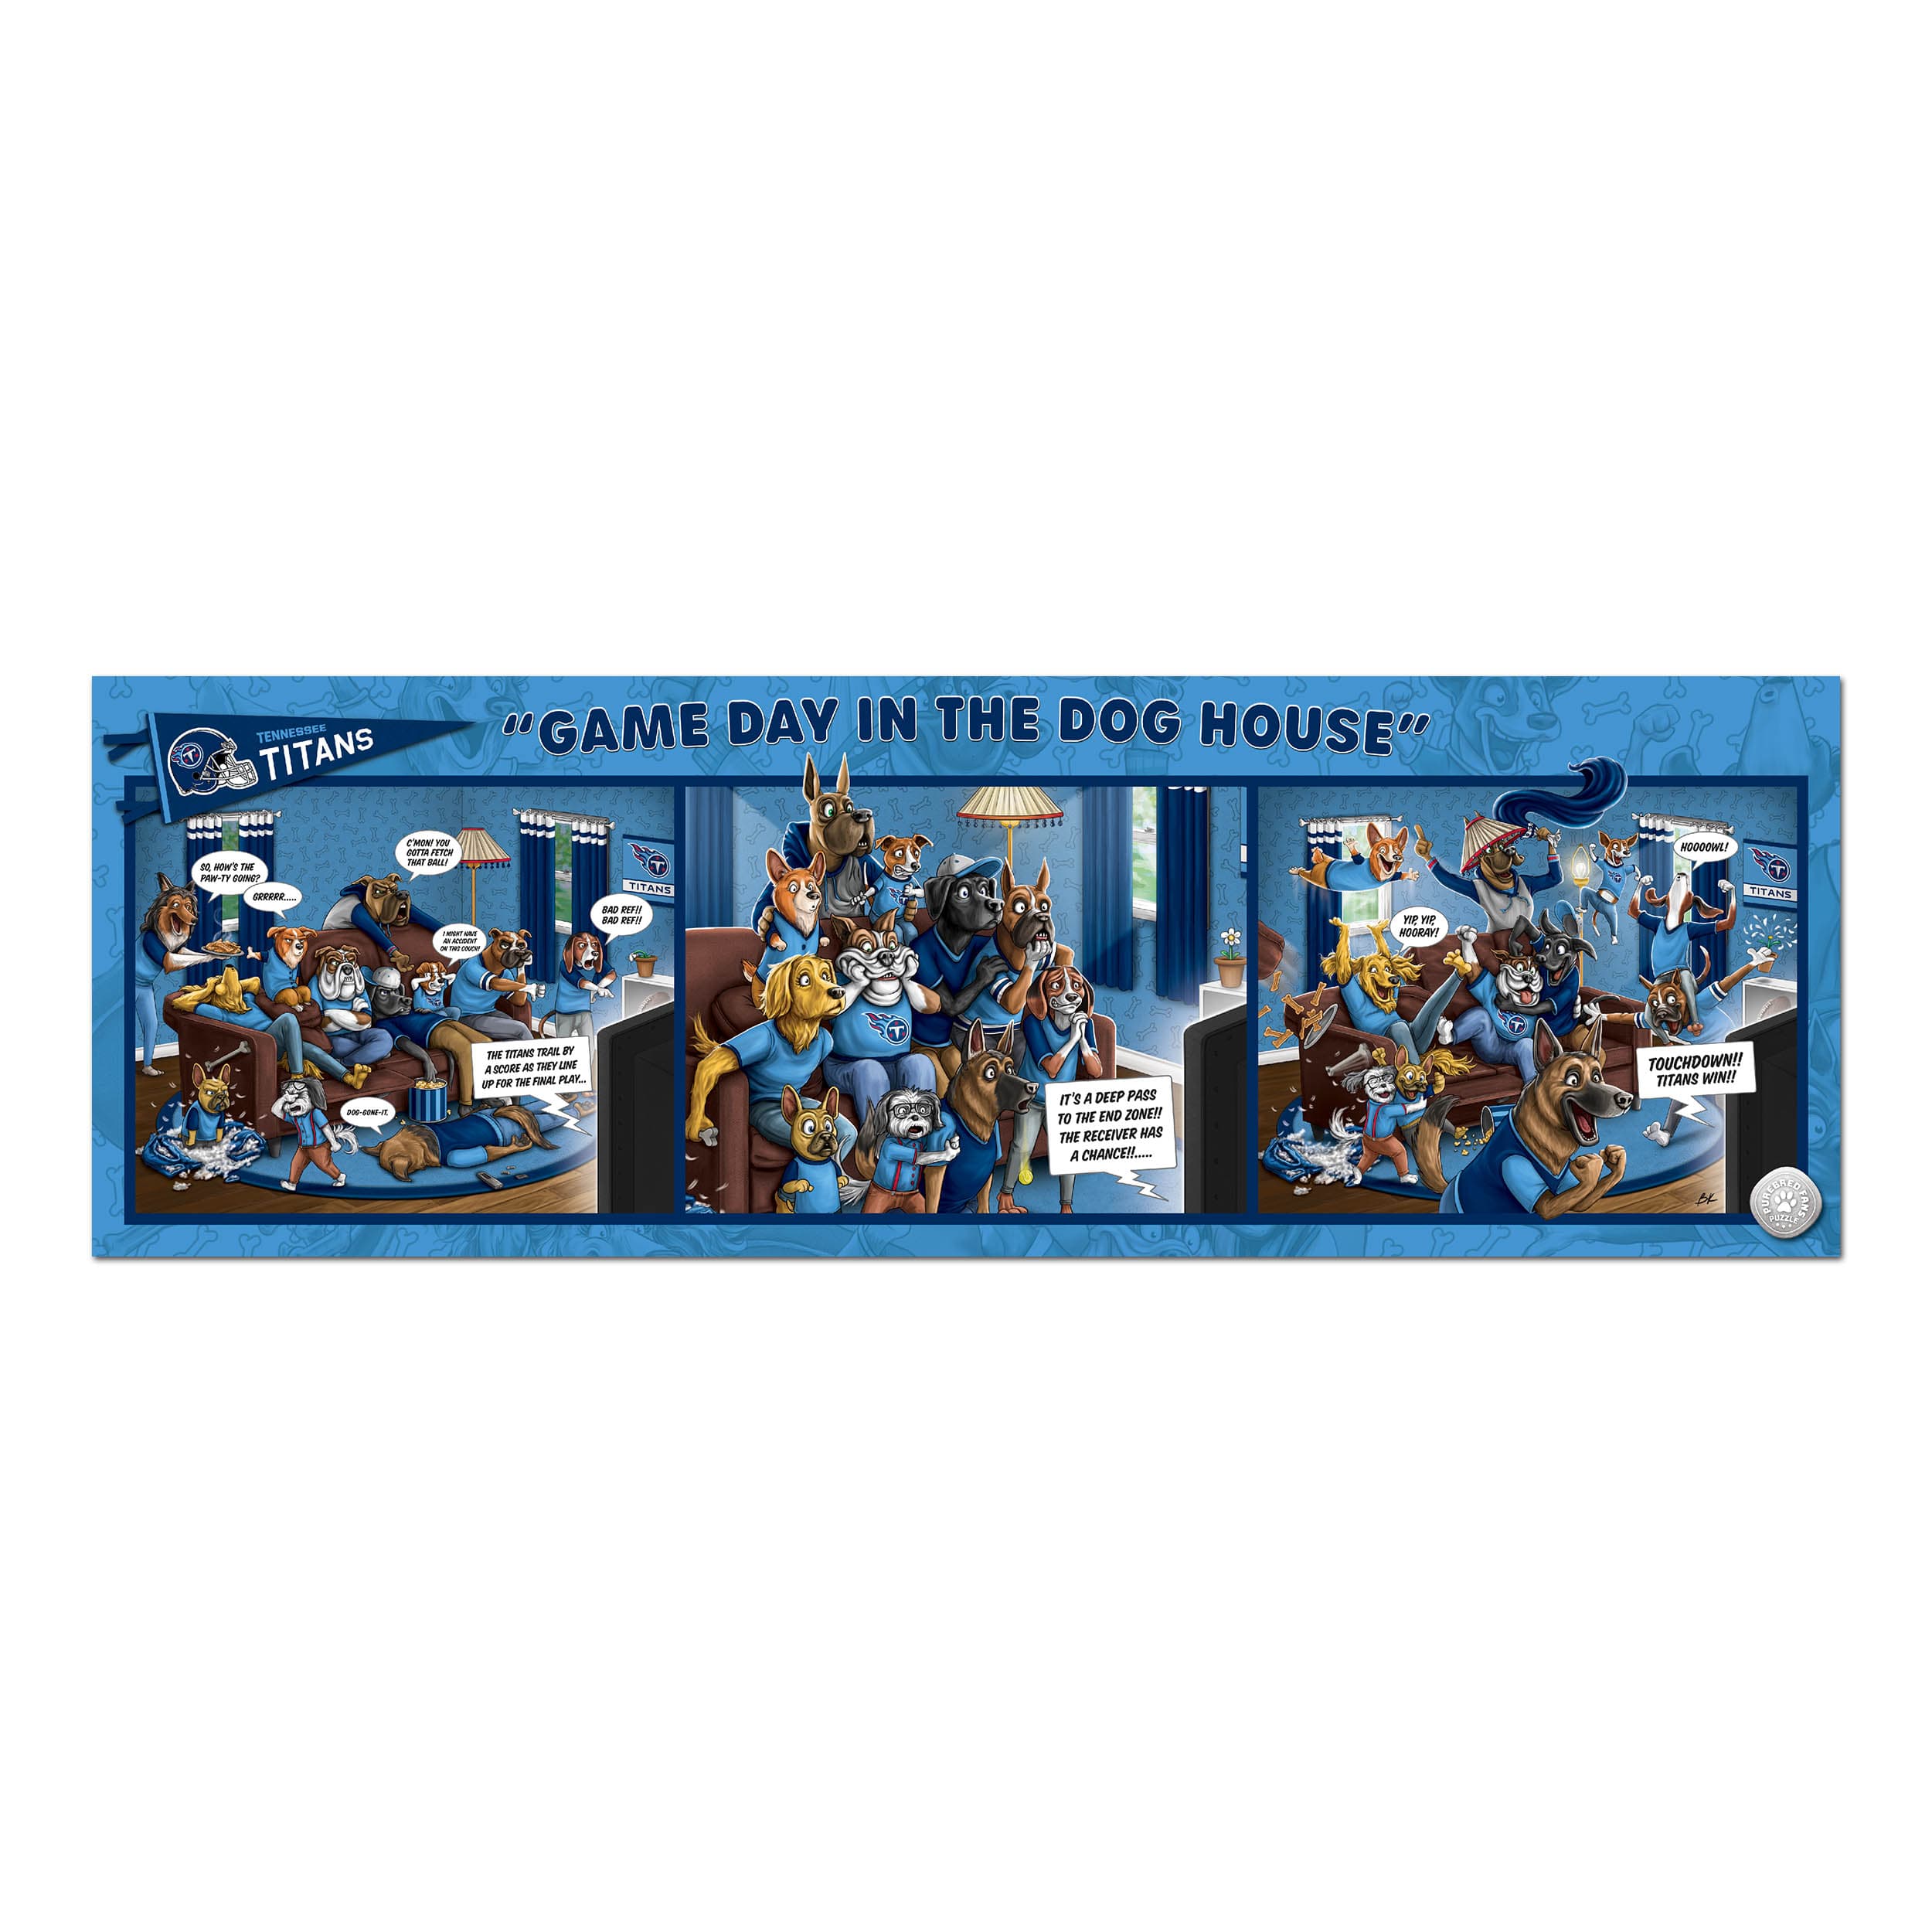 NFL Game Day in the Dog House 1,000 Piece Puzzle